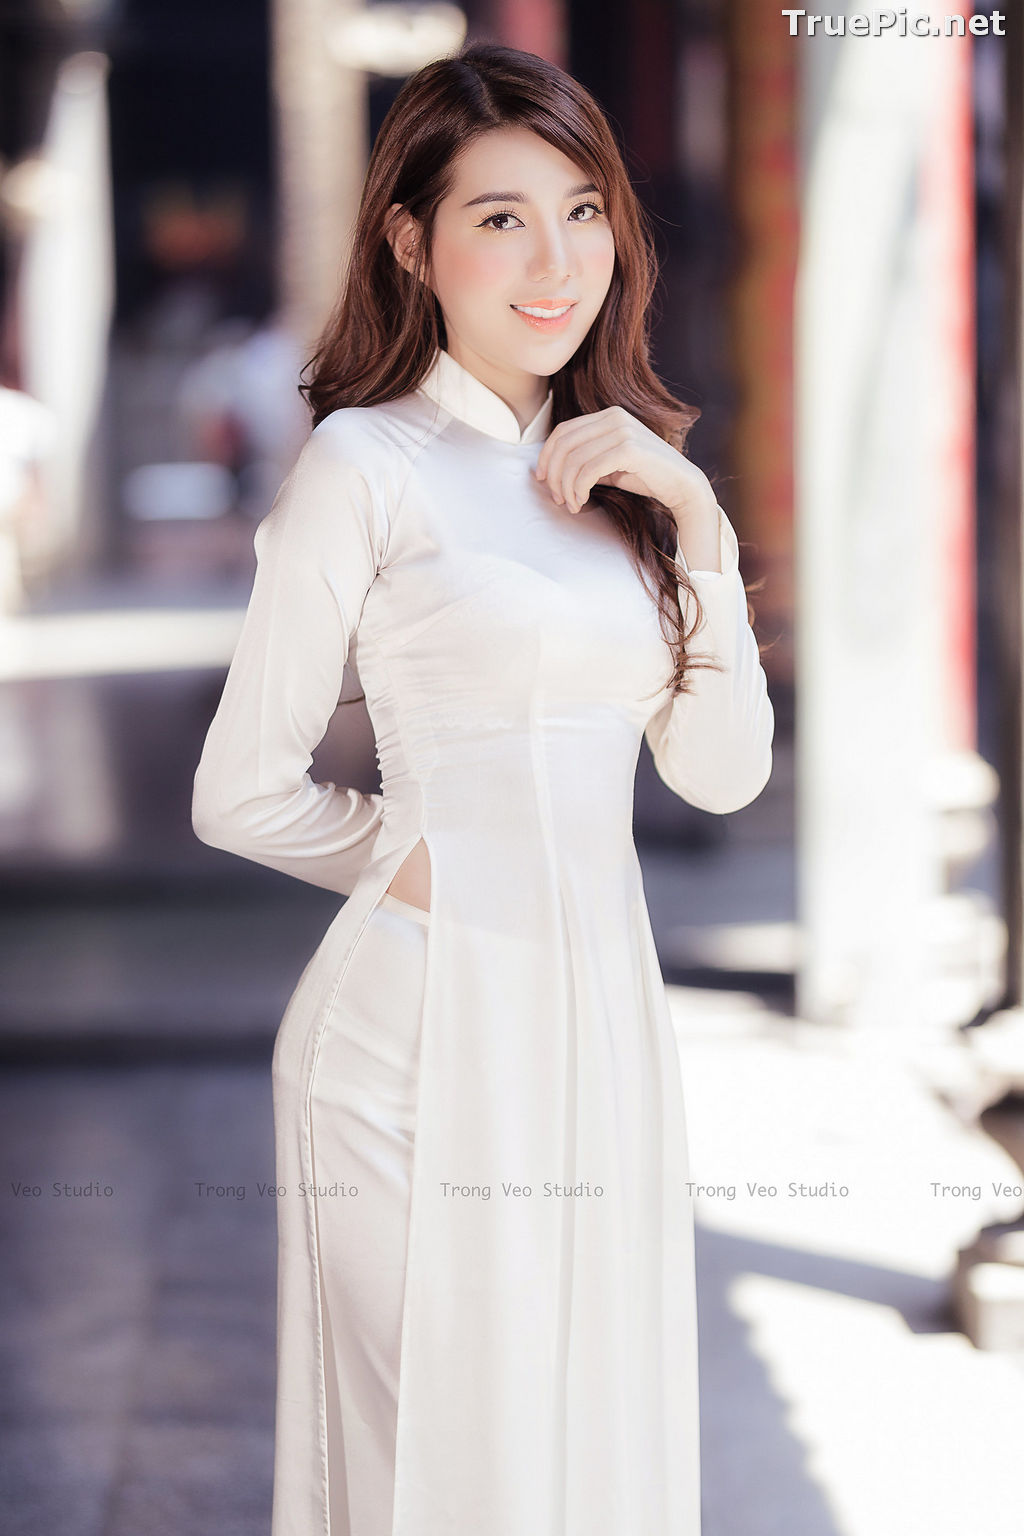 The Beauty of Vietnamese Girls with Traditional Dress (Ao Dai) #3